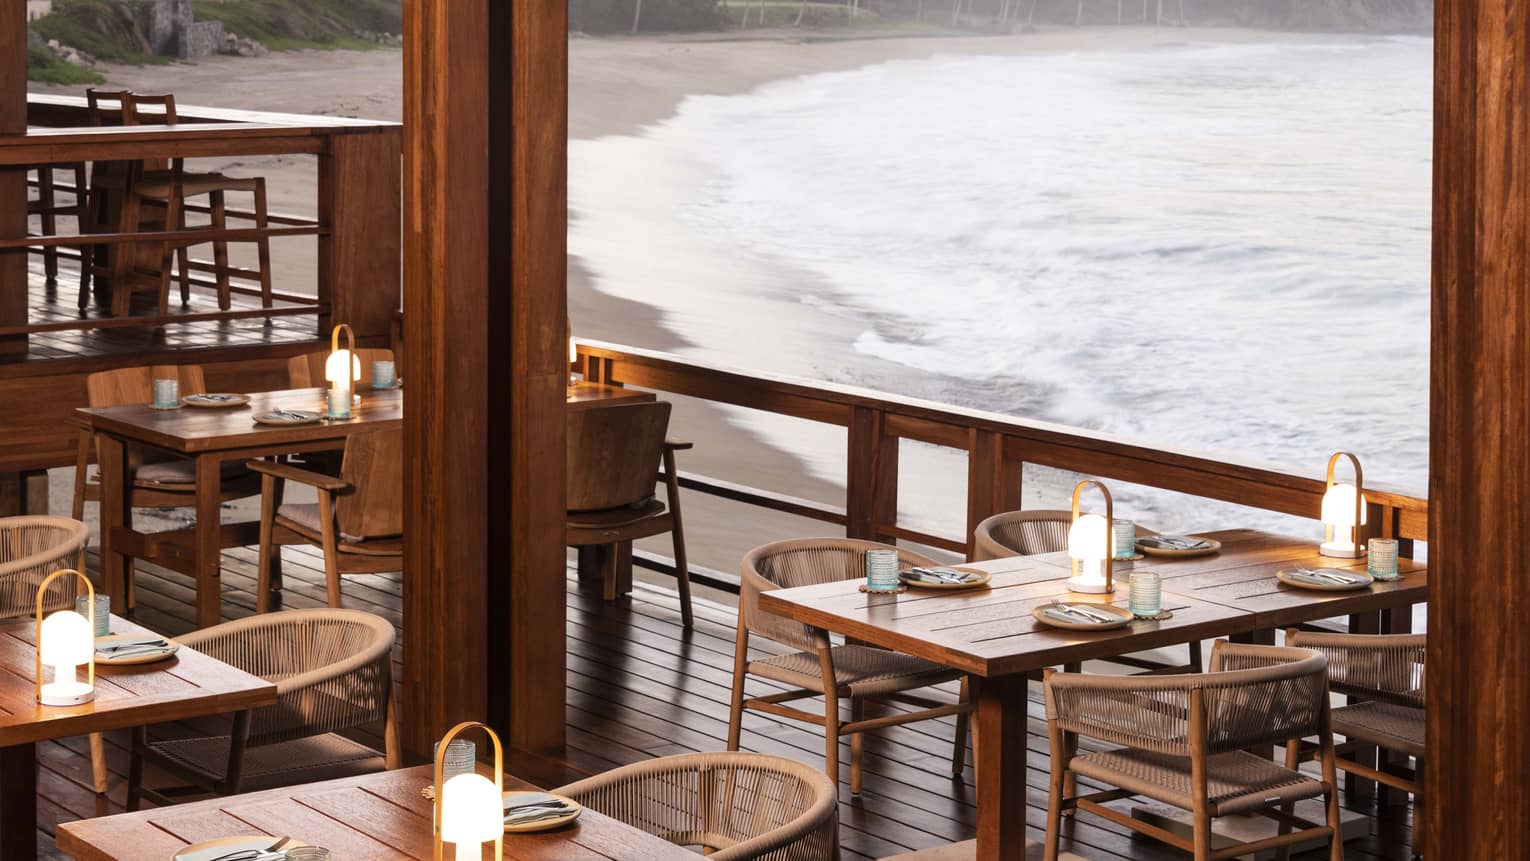 Wooden tables and chairs with small lanterns on restaurant terrace, next to the beach